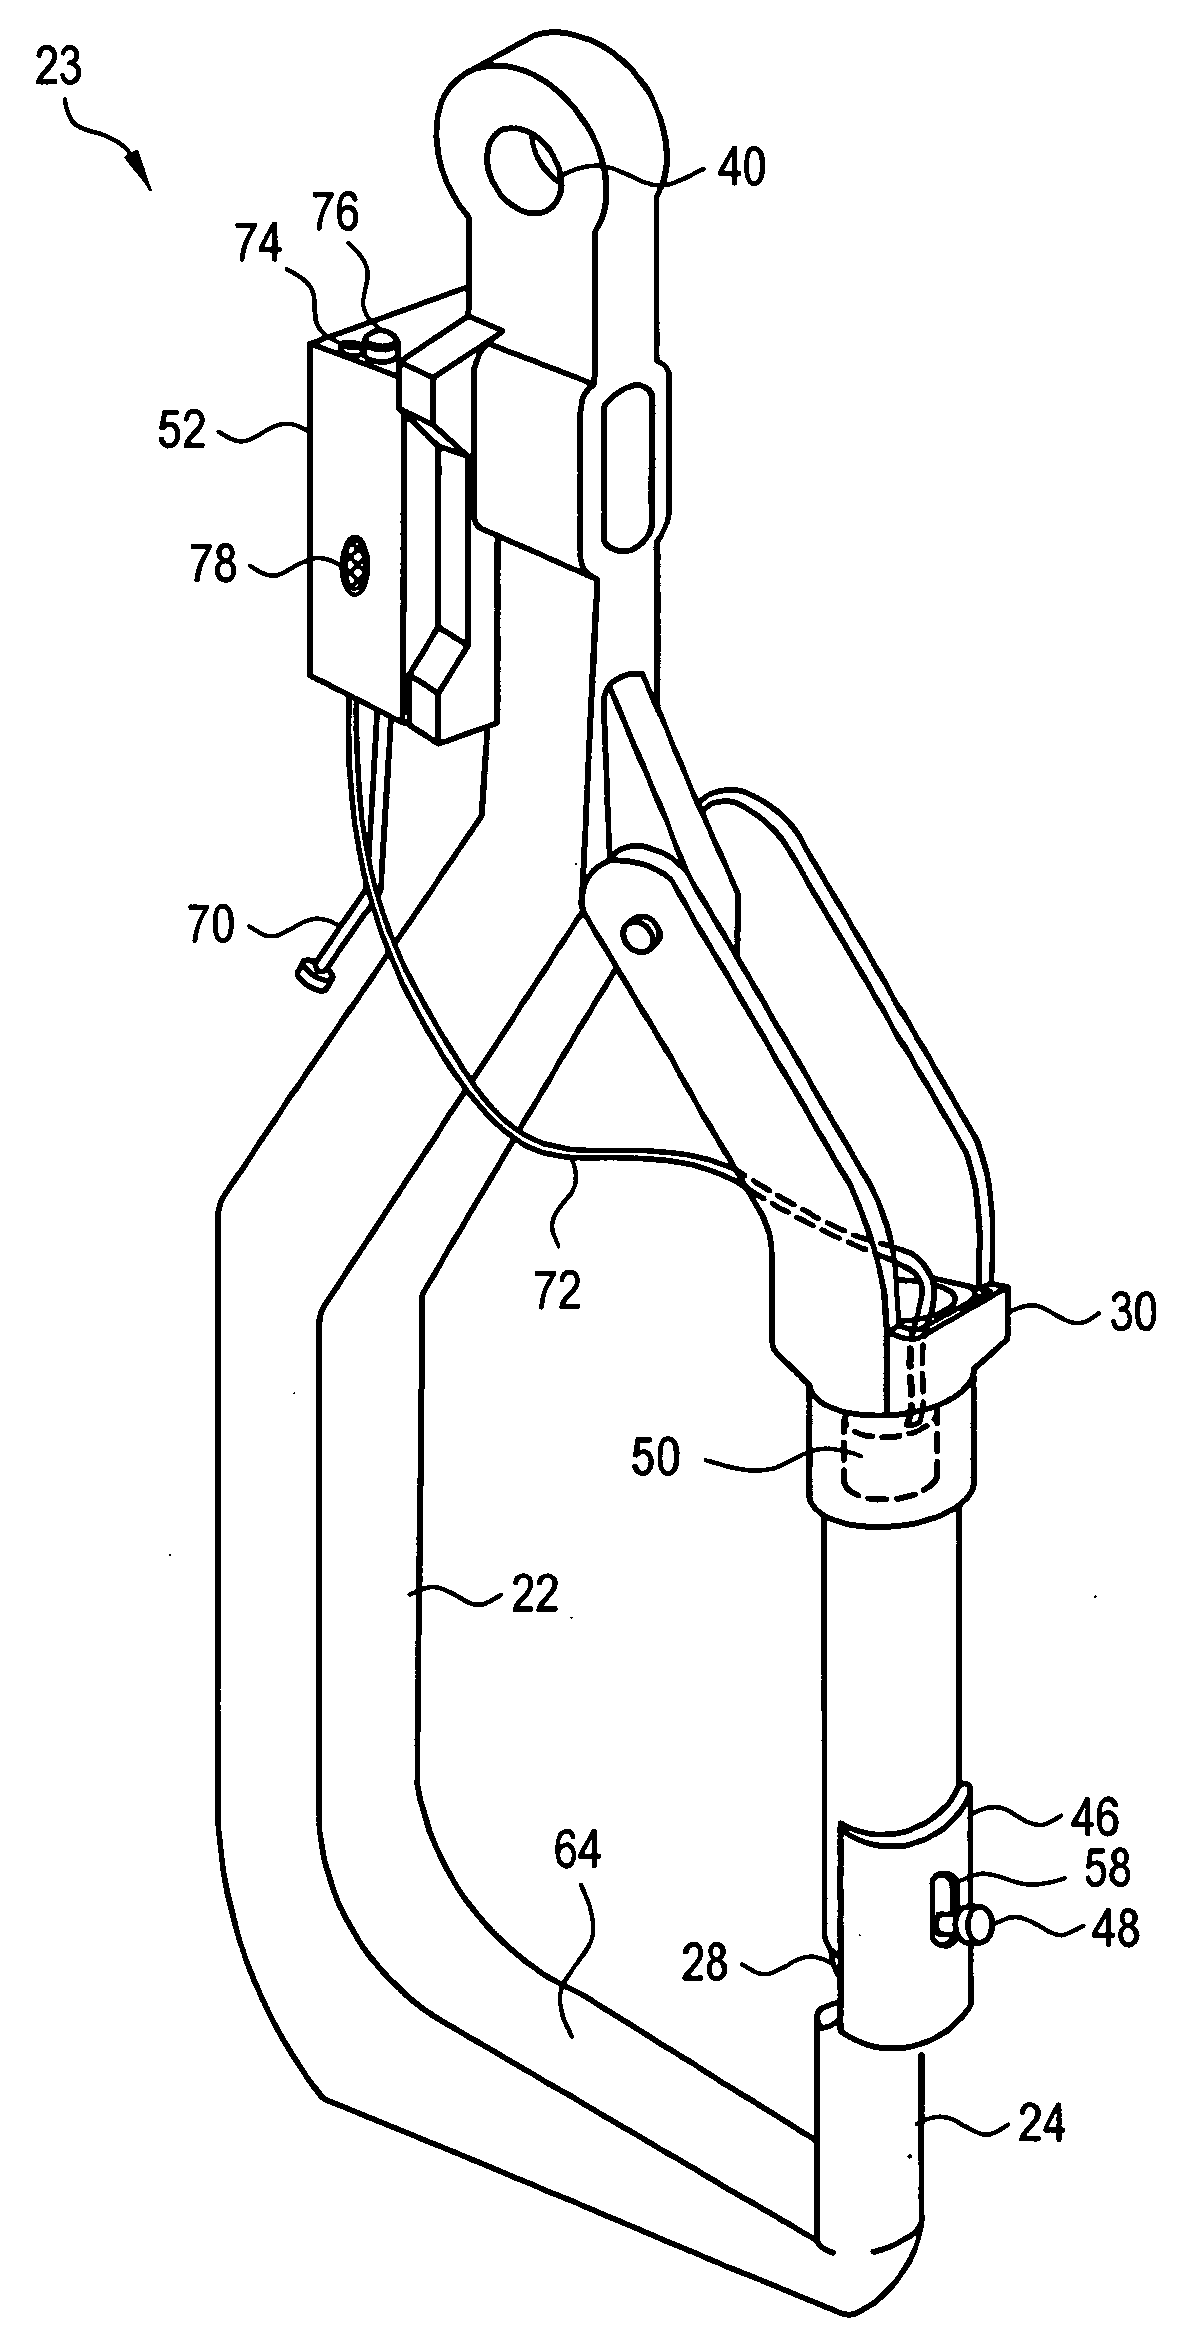 Crane hook with remotely operated safety latch release